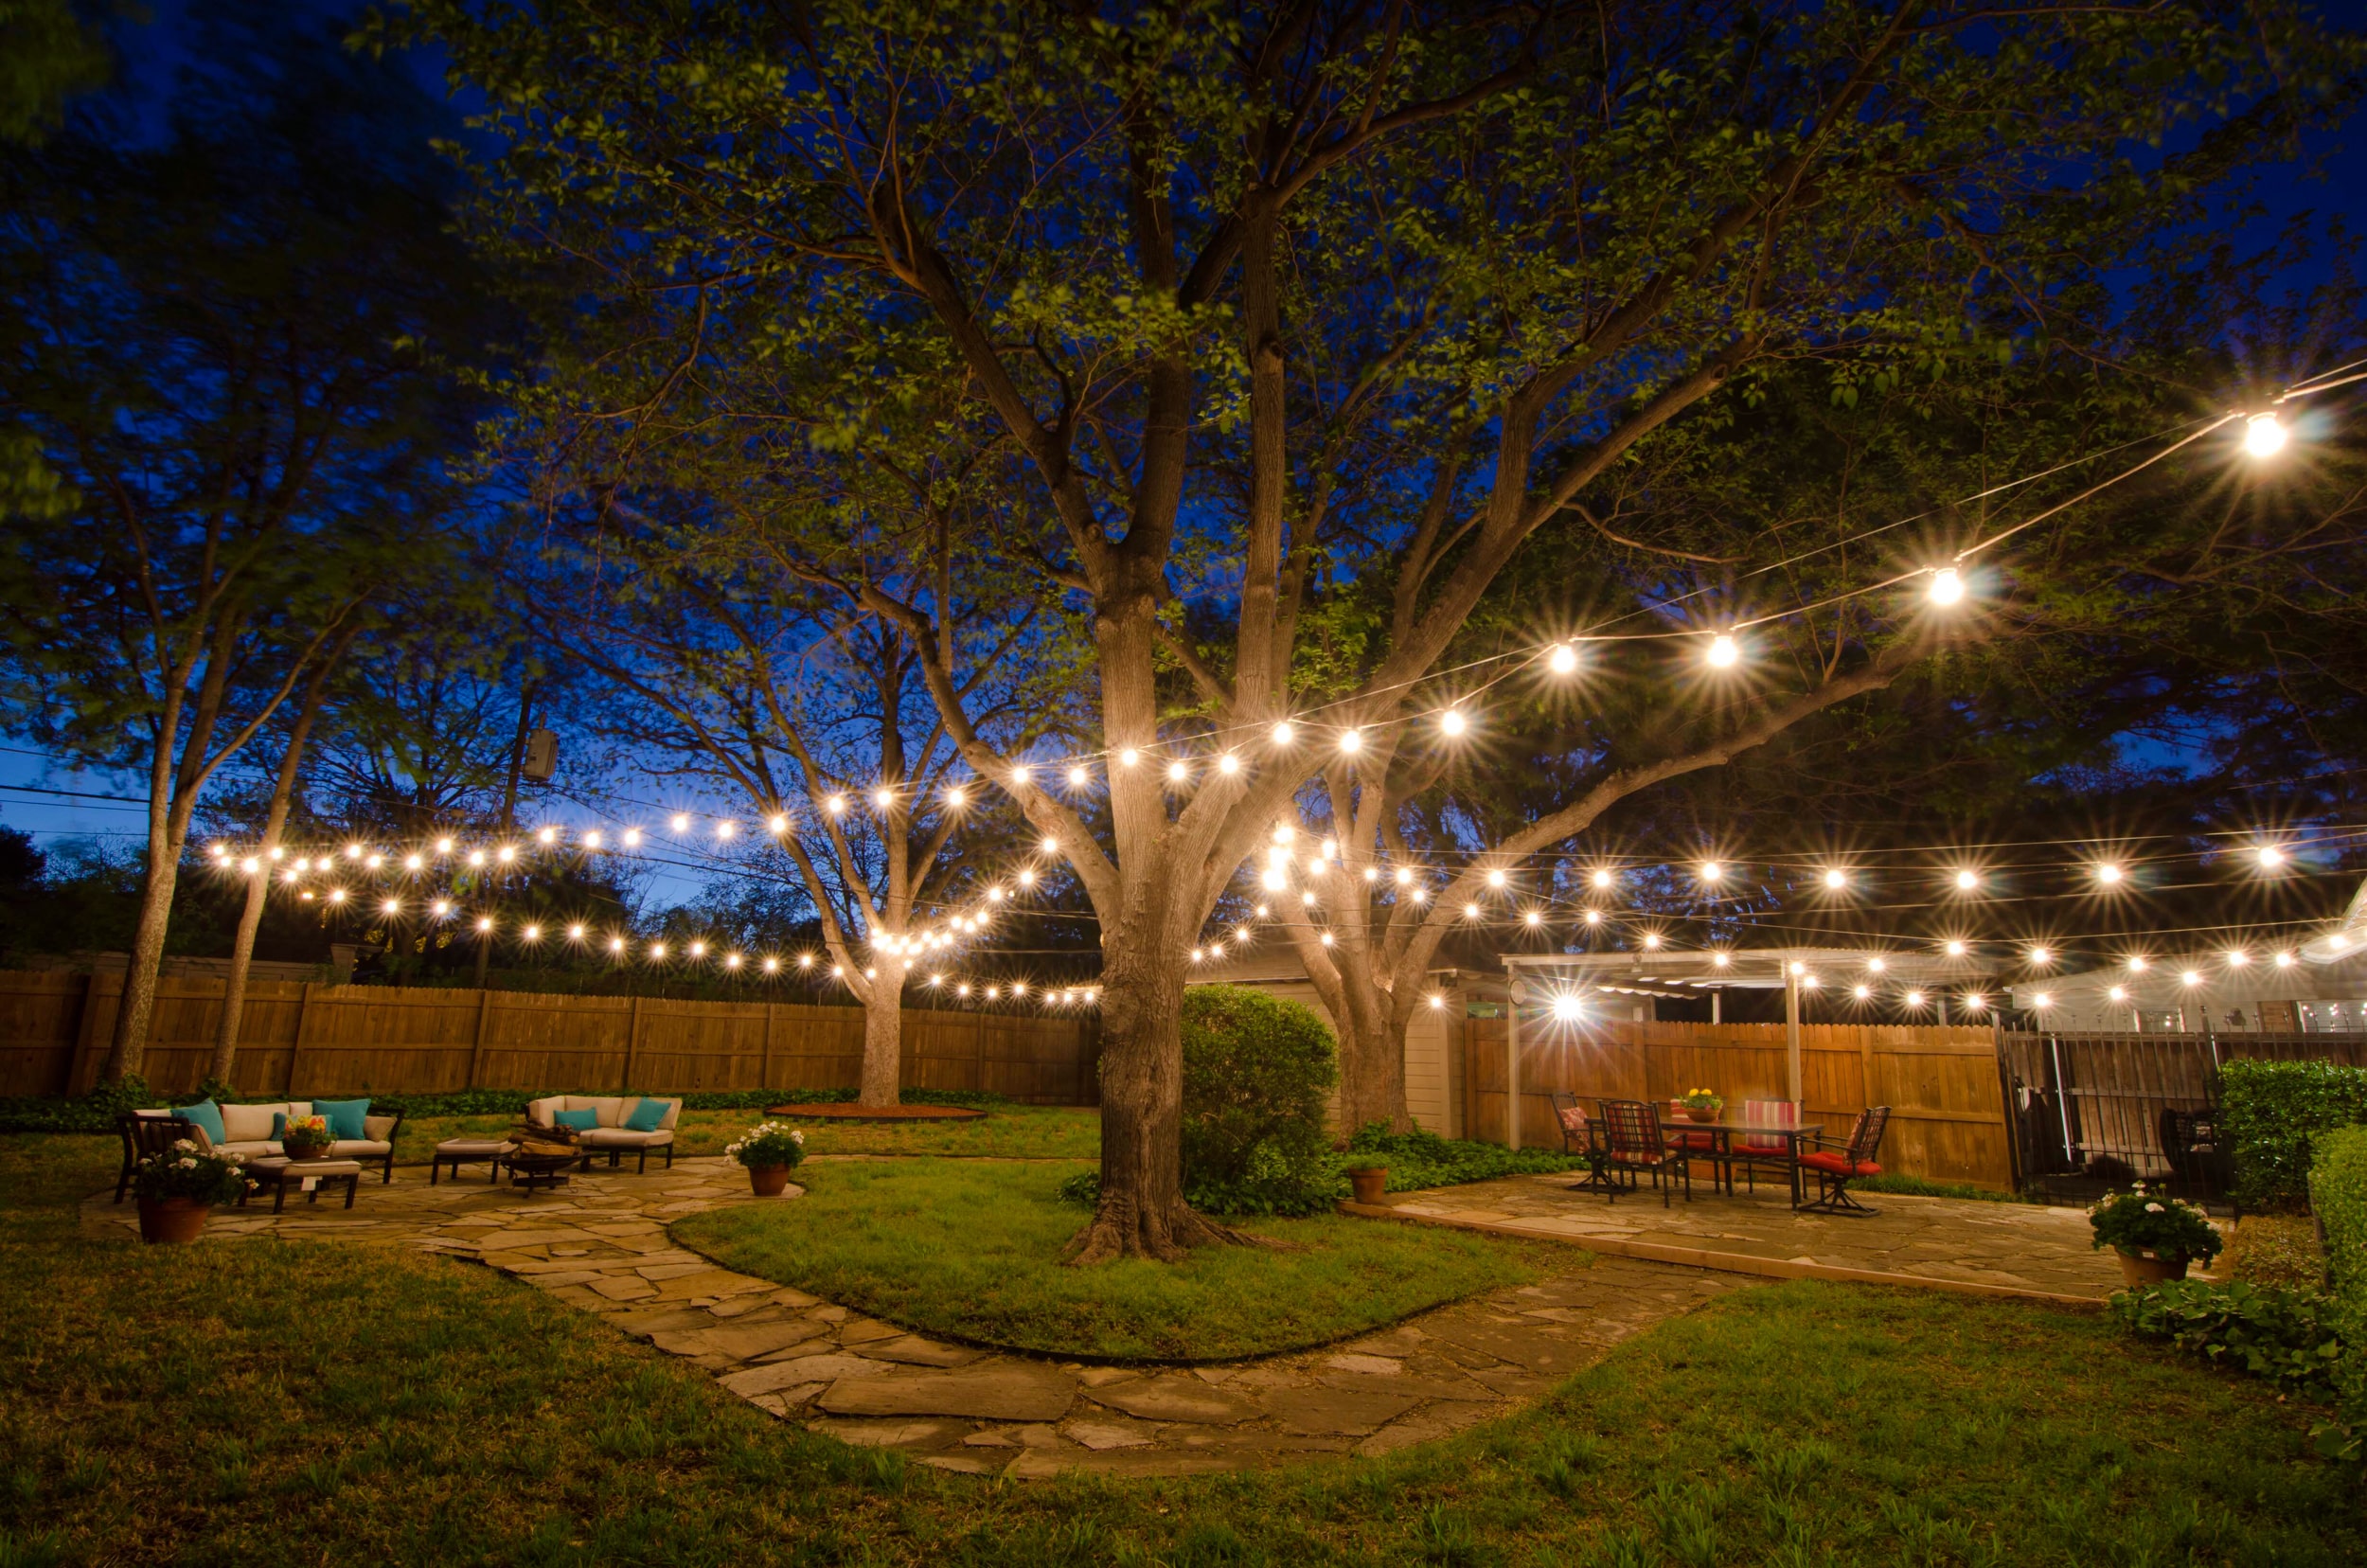 A serene backyard illuminated by string lights, creating a warm and inviting atmosphere. The soft glow of the lights adds a magical touch to the outdoor space, casting a gentle radiance on the surrounding plants and furniture. The strings of lights are delicately draped across the yard, forming a mesmerizing pattern against the night sky. The cozy ambiance invites relaxation and outdoor gatherings, making it a perfect setting for socializing or enjoying a peaceful evening under the stars.